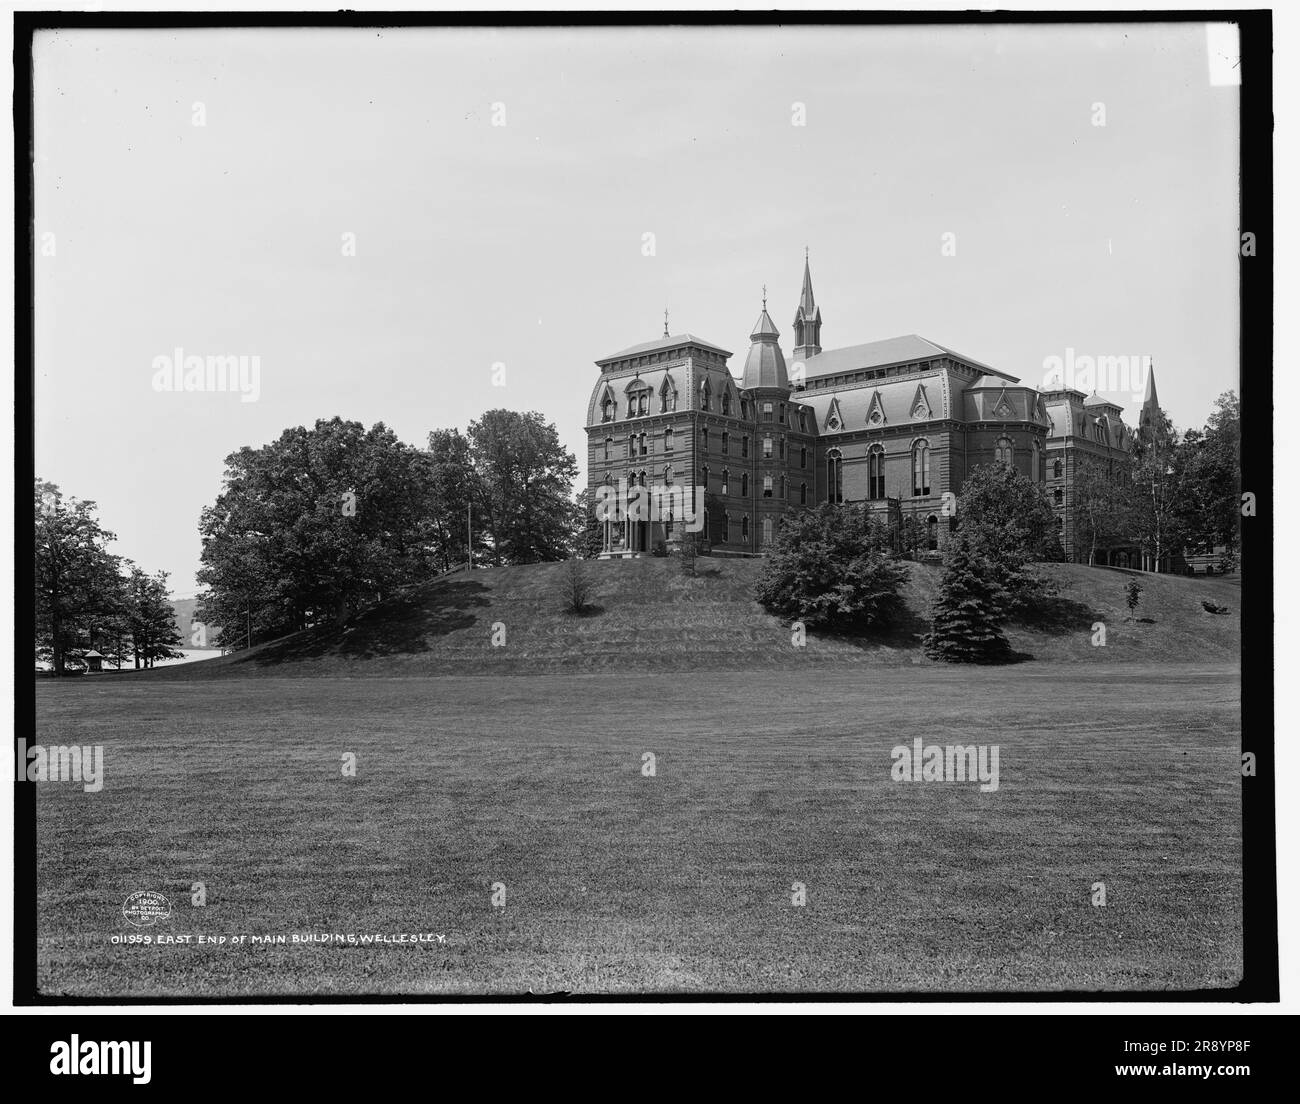 East end of main building, Wellesley, c1900. Stock Photo